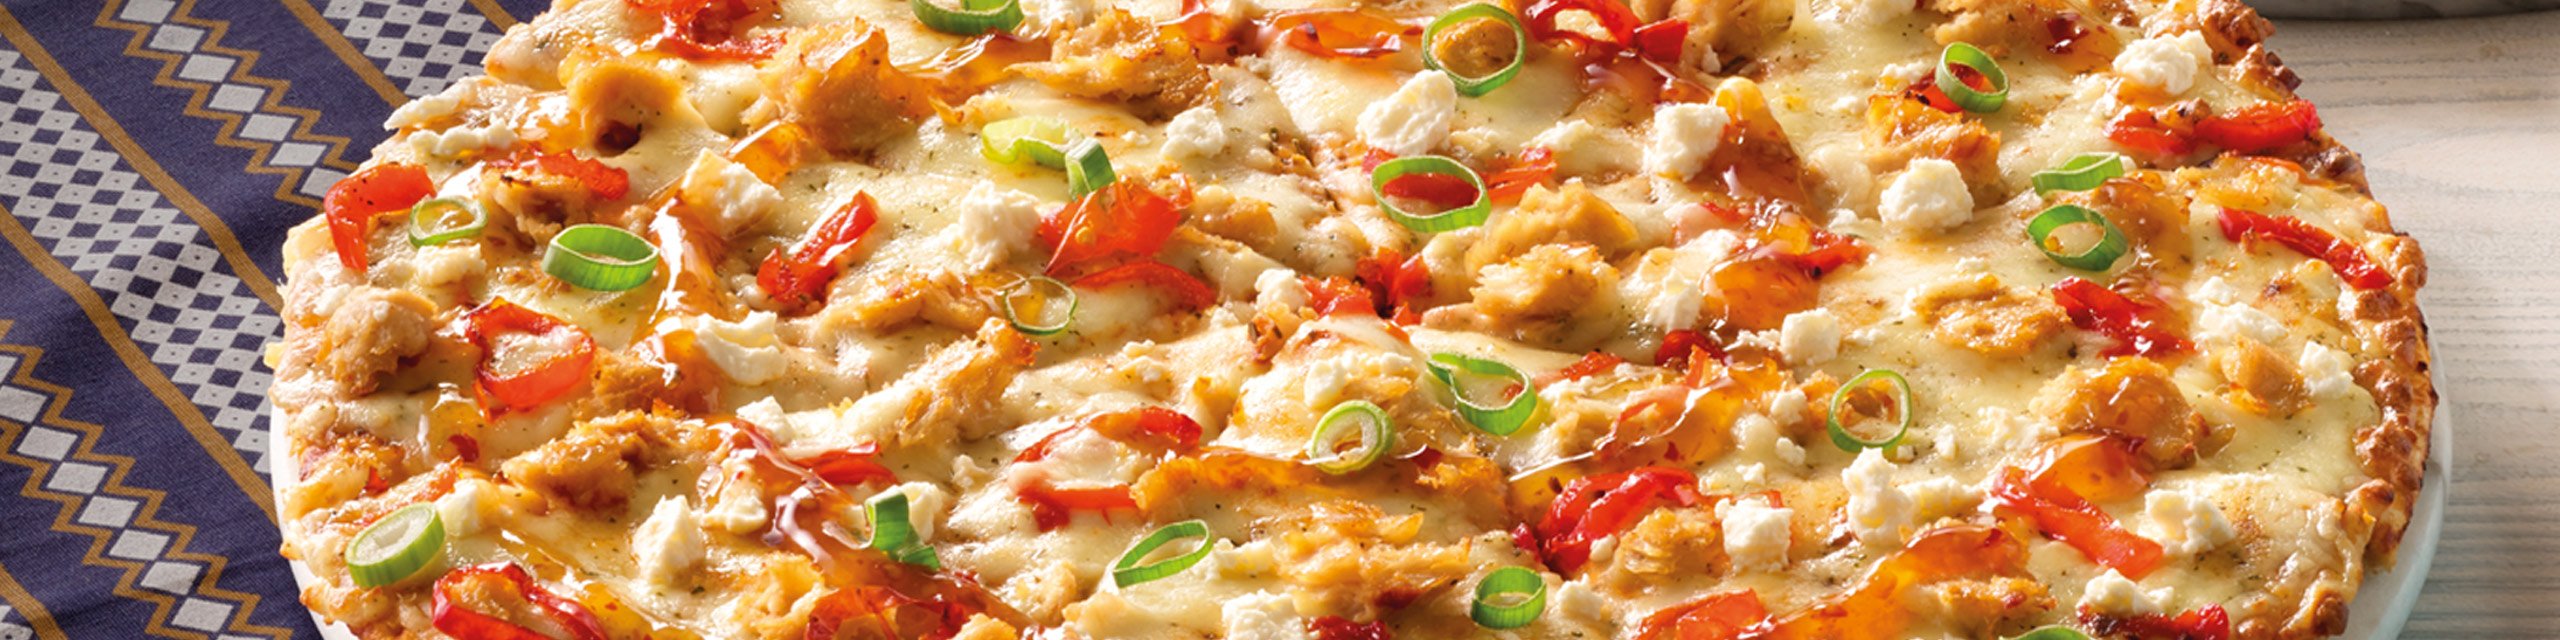 Large chicken pizza on a plate. Debonairs Pizza has affordable pizzas that you can order online for delivery.